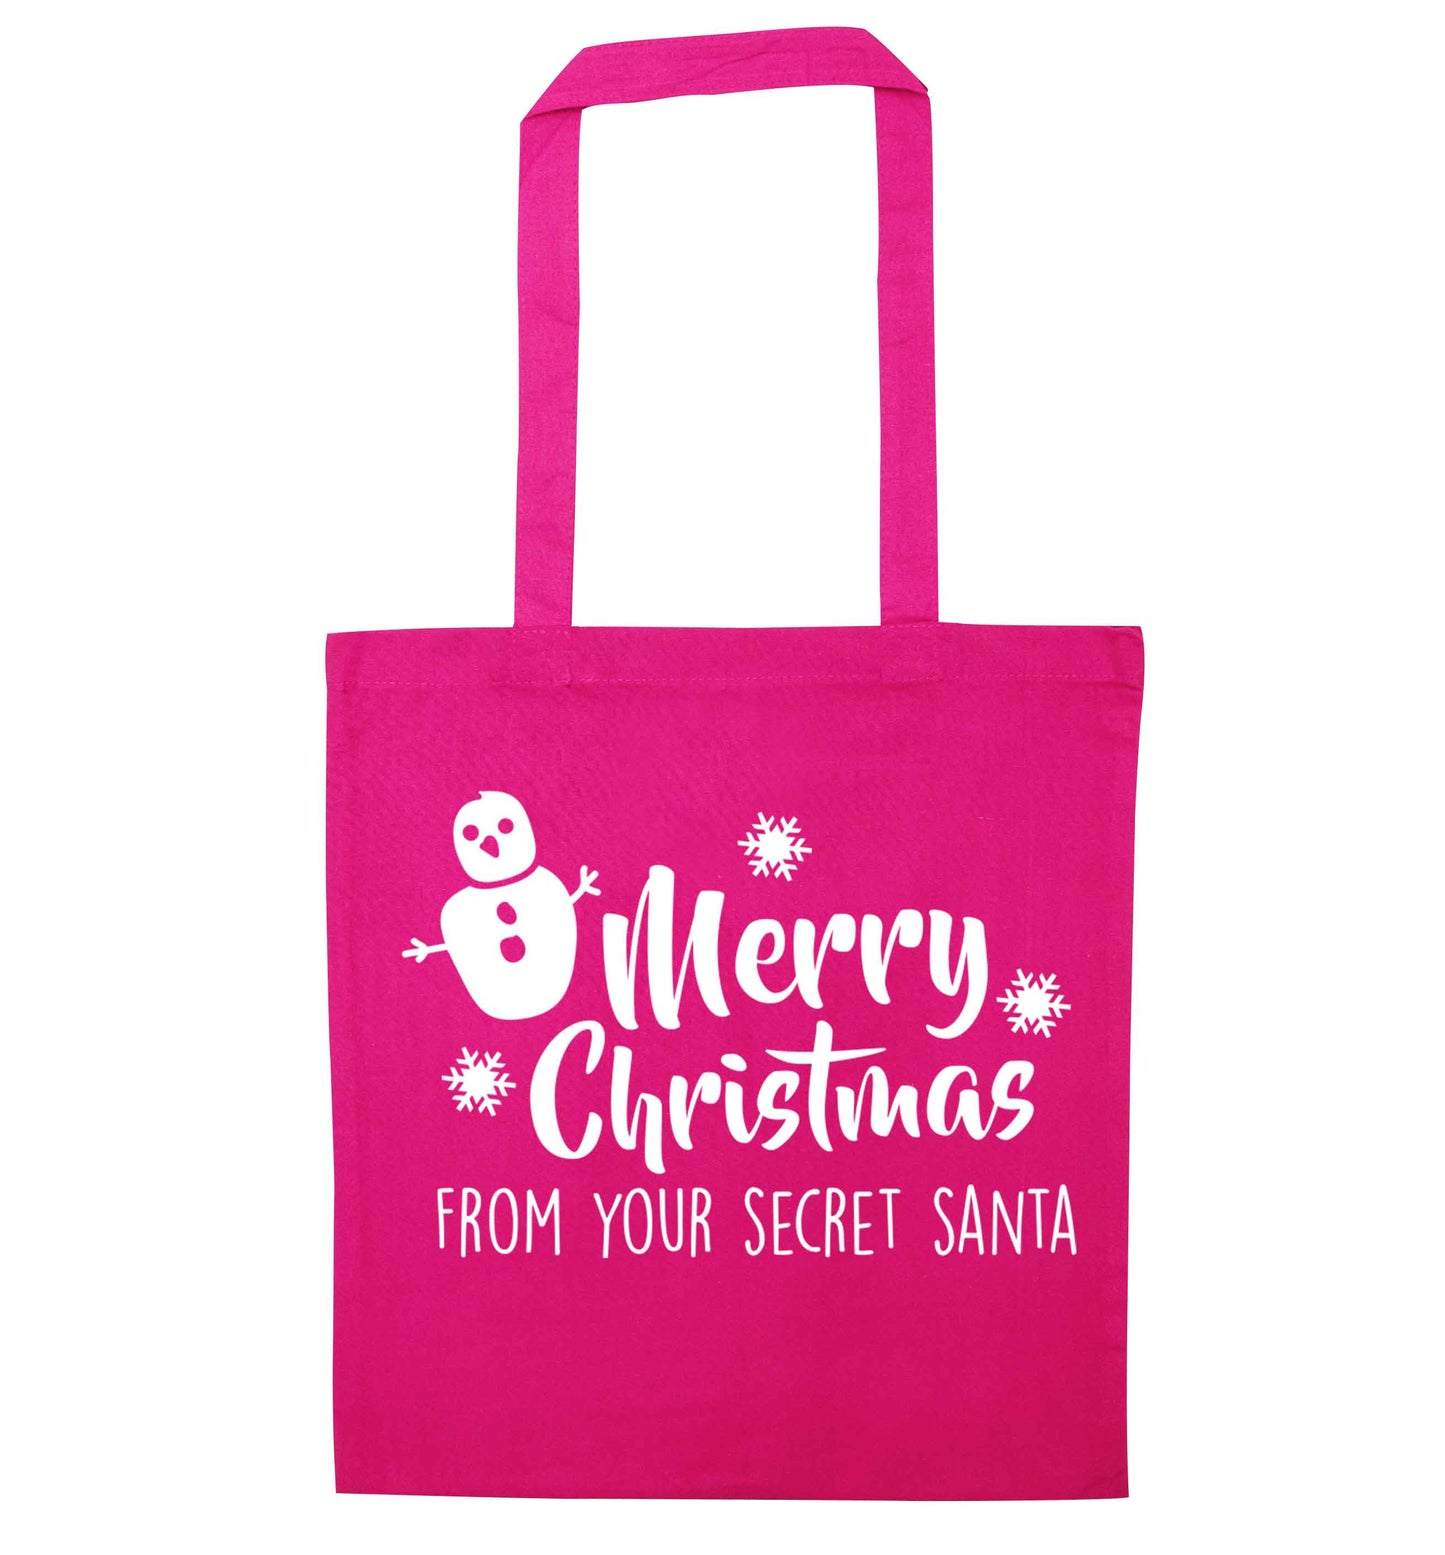 Merry Christmas from your secret Santa pink tote bag